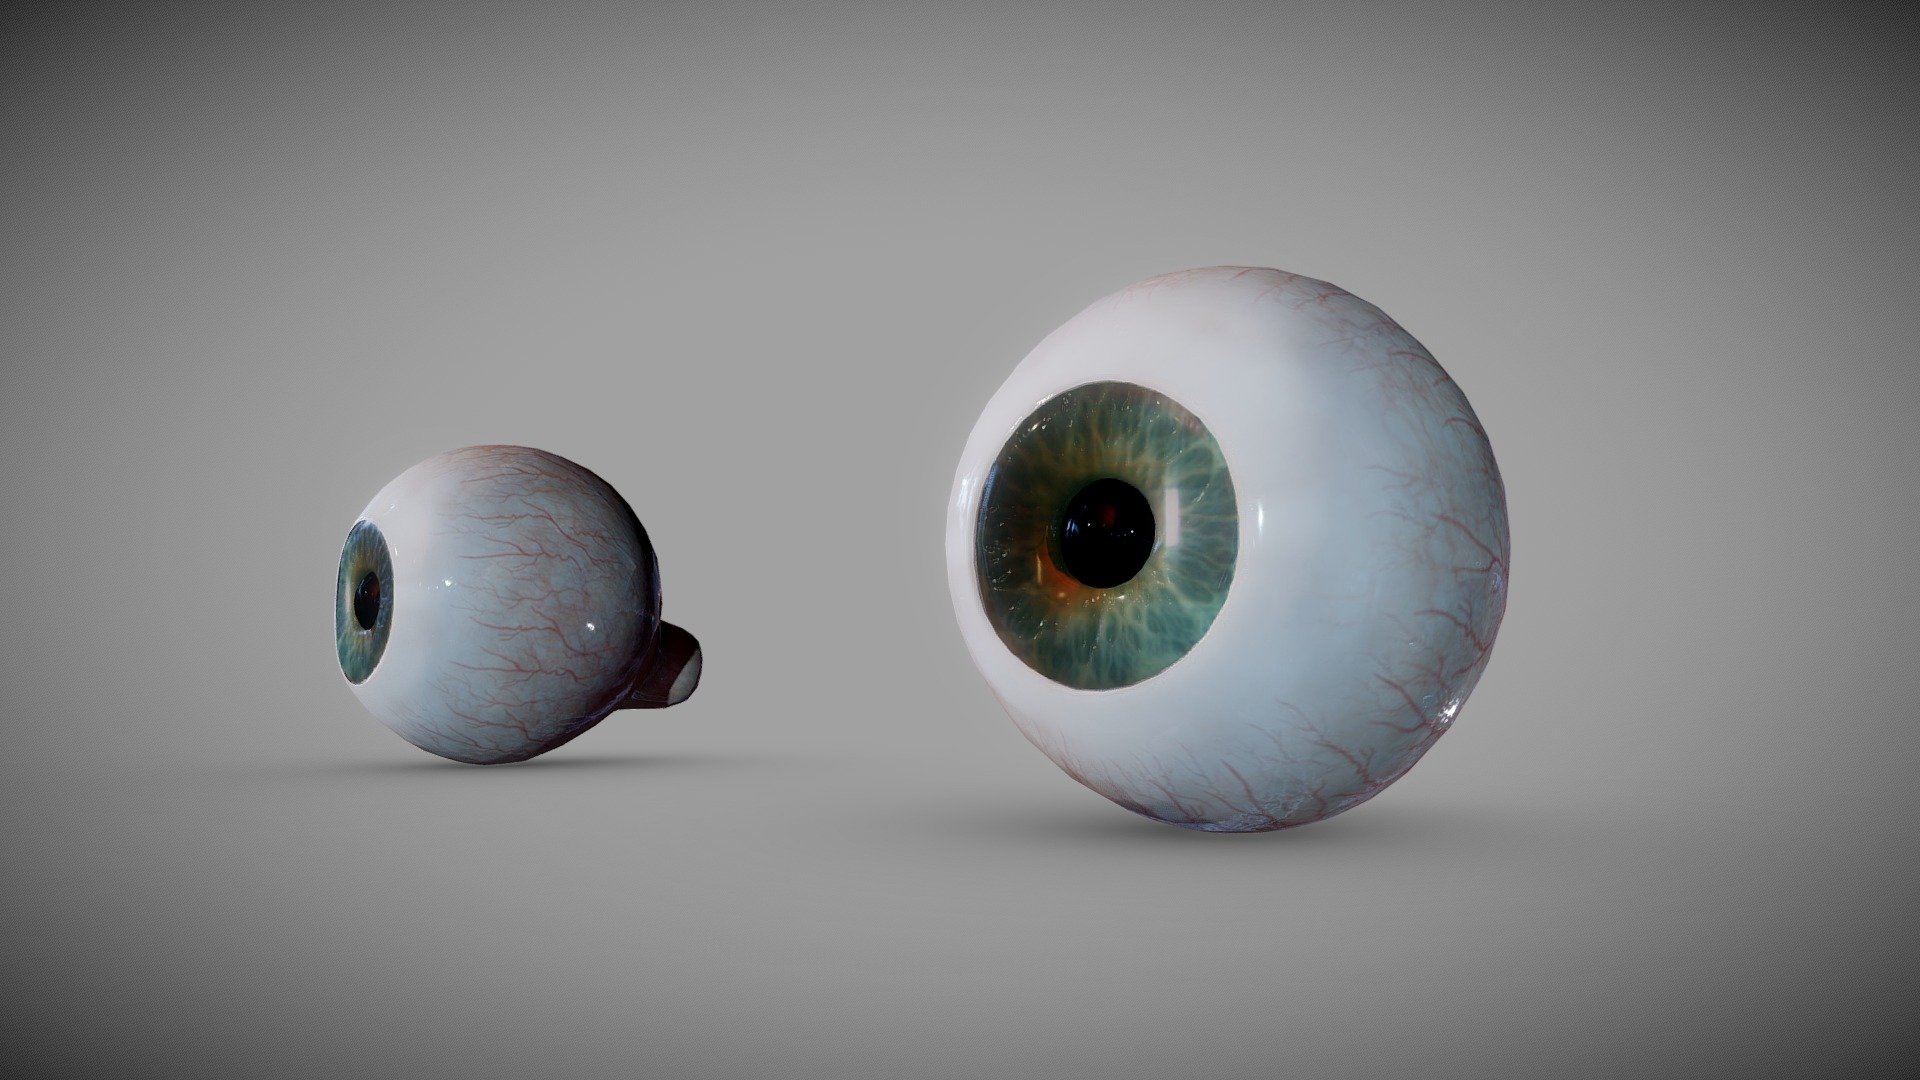 The human eye is a sensory organ, part of the sensory nervous system, that reacts to visible light and allows us to use visual information for various purposes including seeing things, keeping our balance, and maintaining circadian rhythm. Human eye 3d model